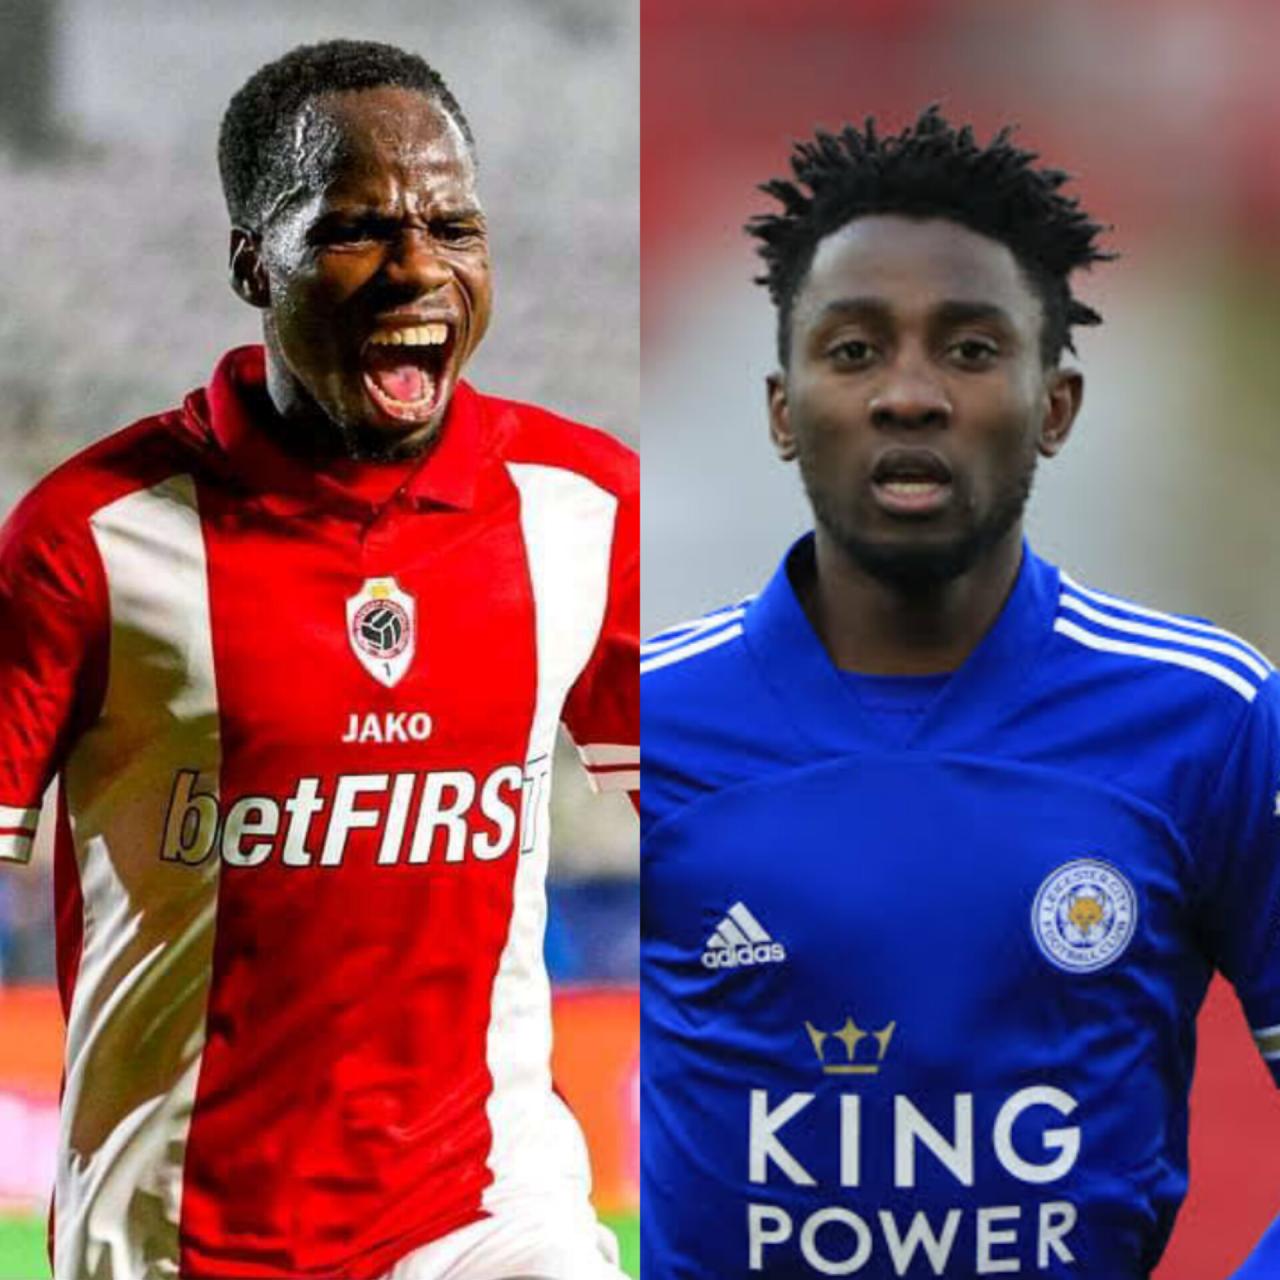 AFCON 2023: Alhassan Yusuf replaces injured Wilfred Ndidi ahead of must win tournament